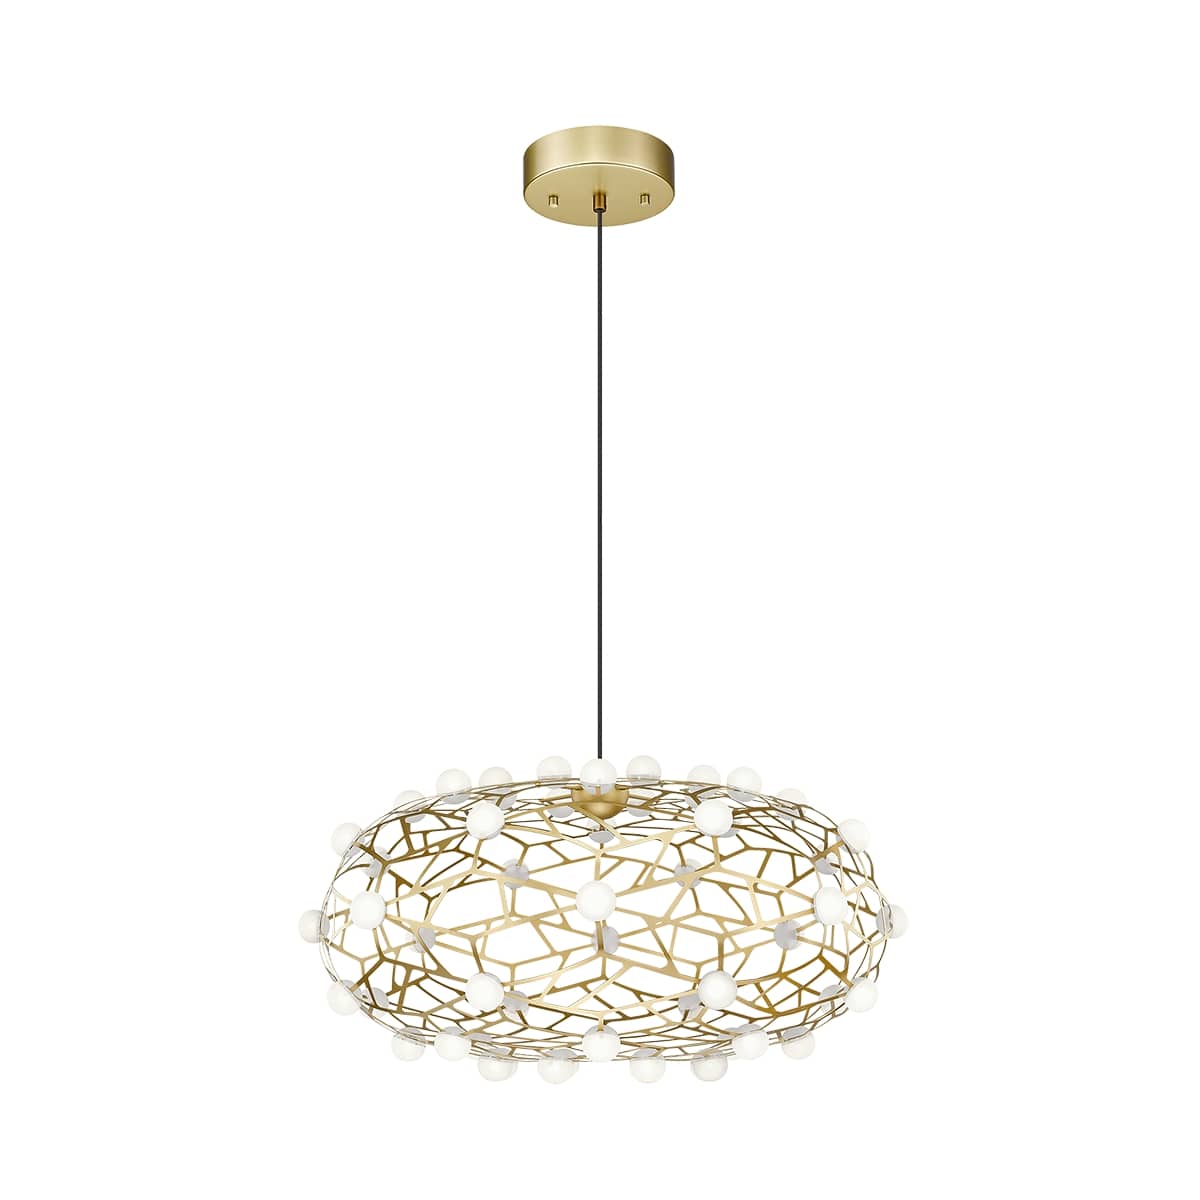 Coral Ceiling Light Chandelier